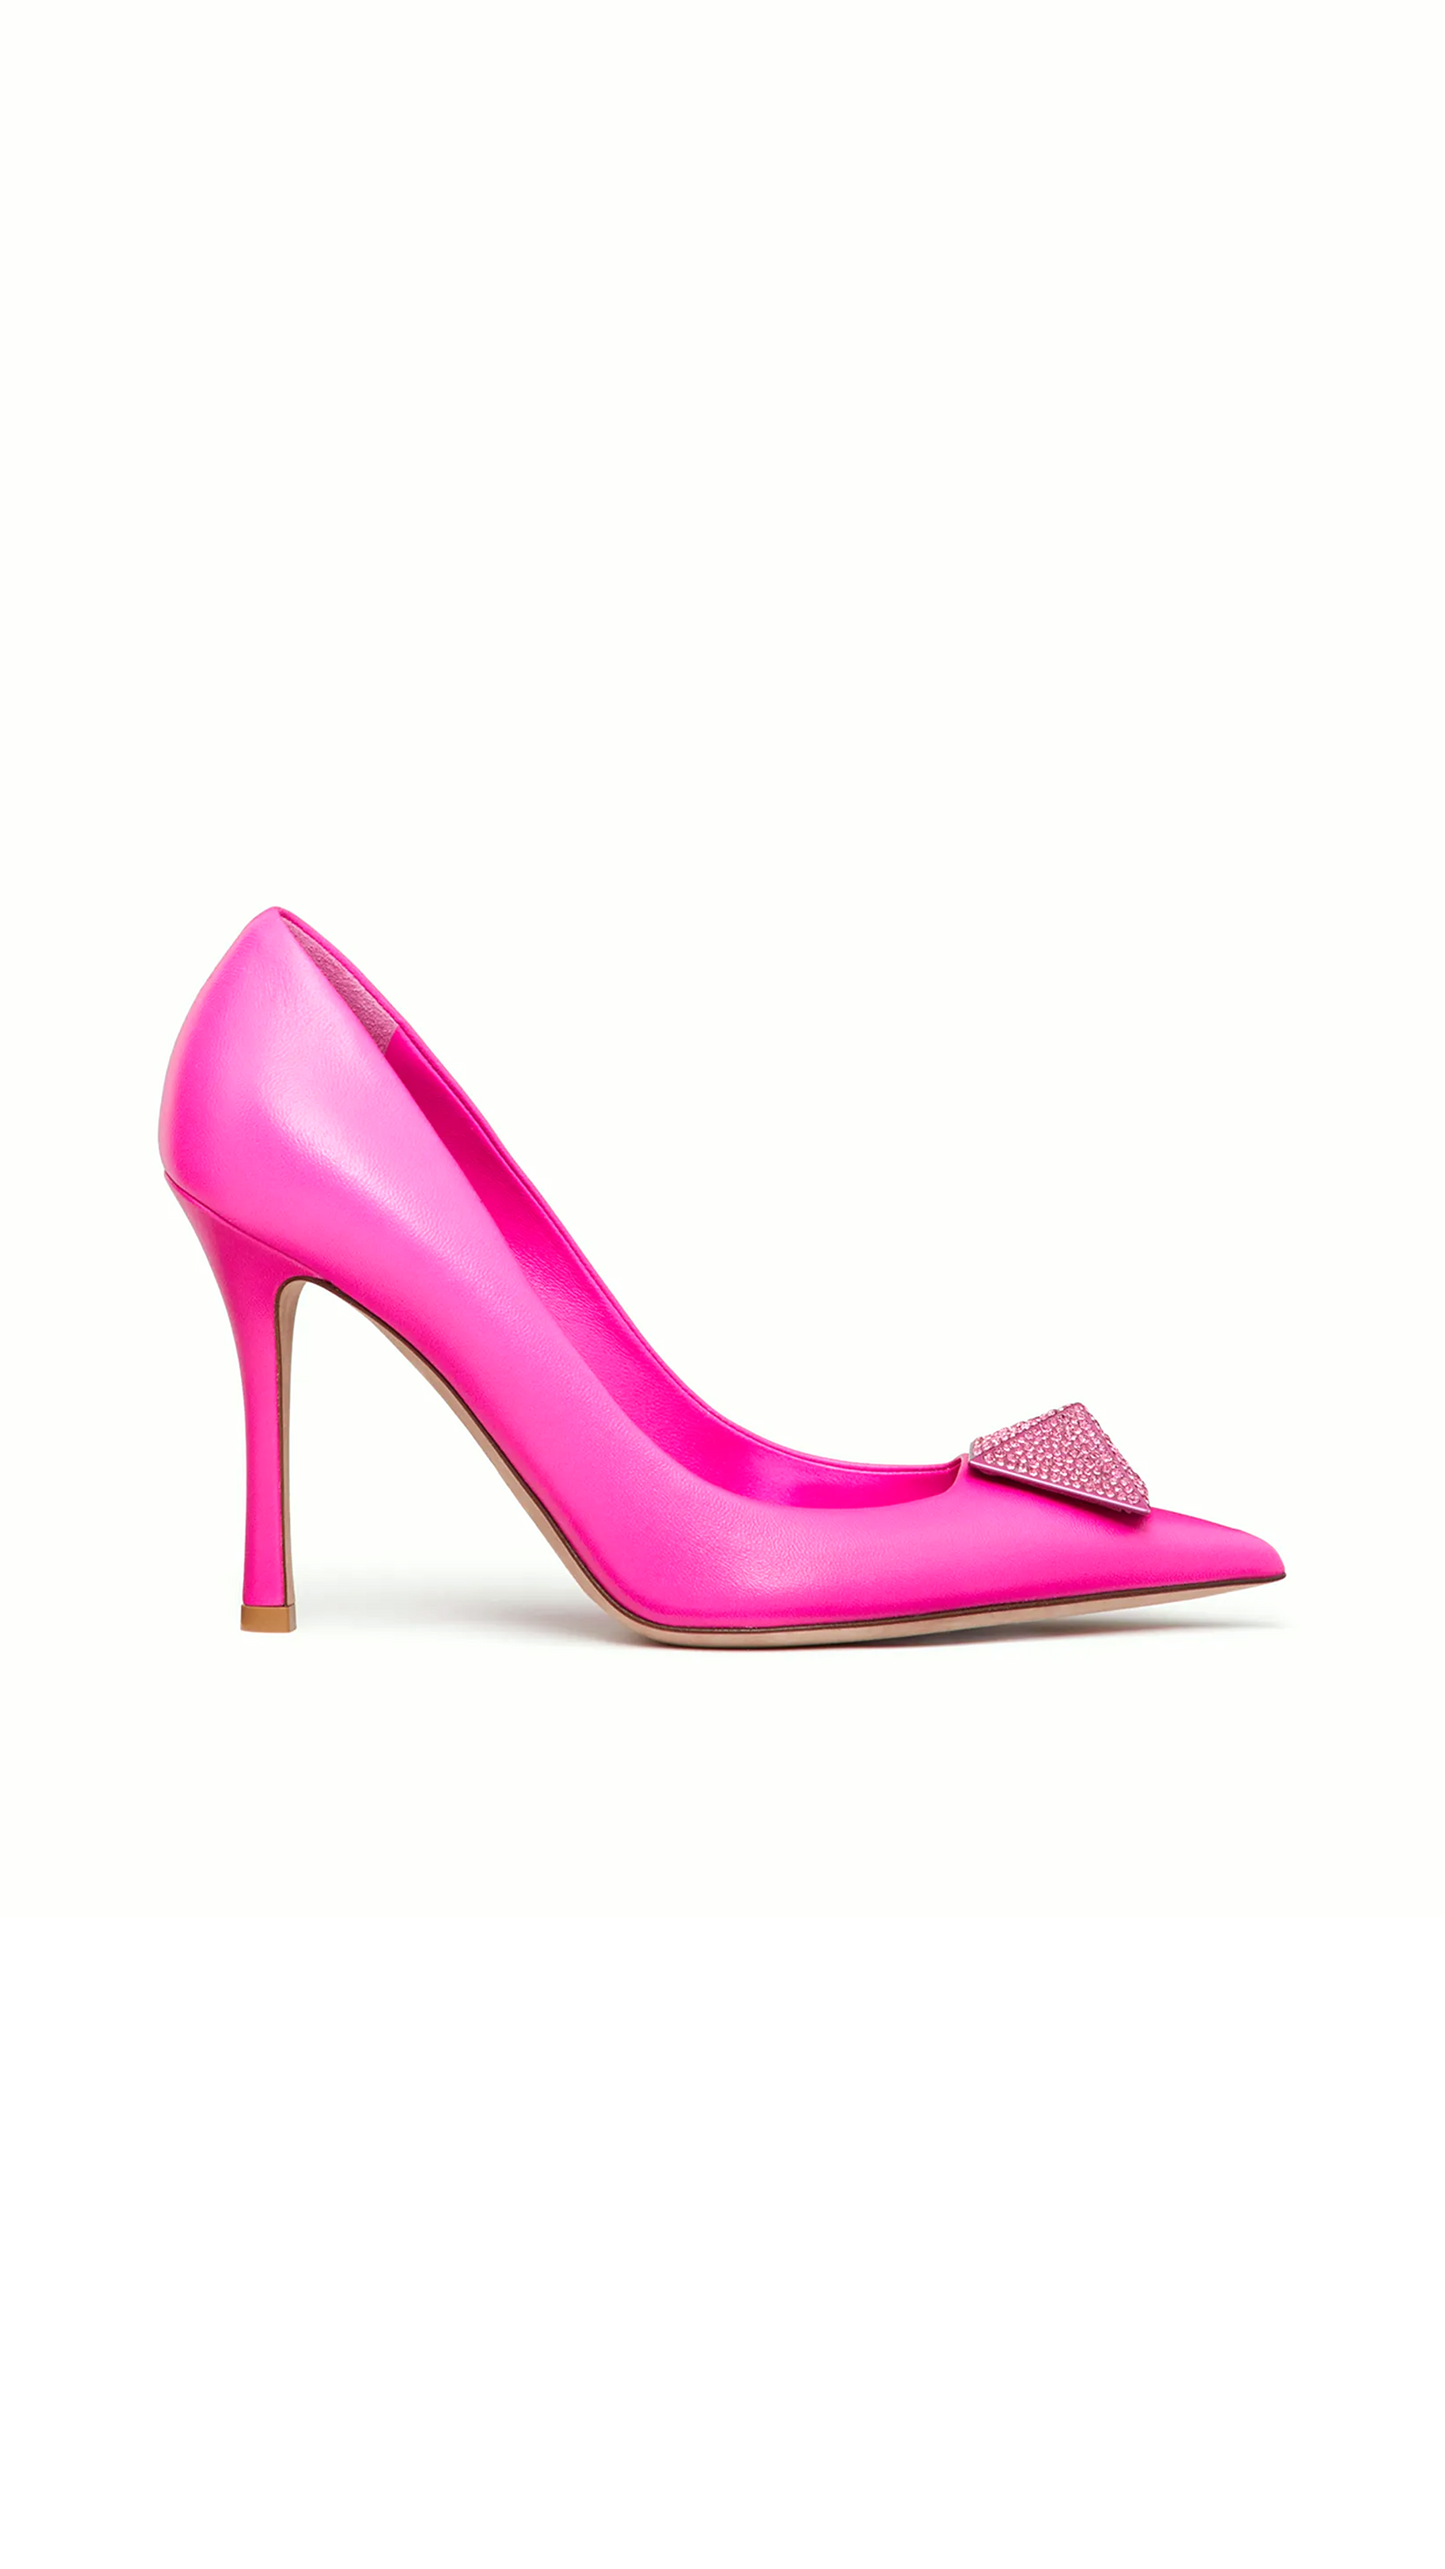 One Stud Nappa Leather Pump with Crystals 100mm - Pink PP